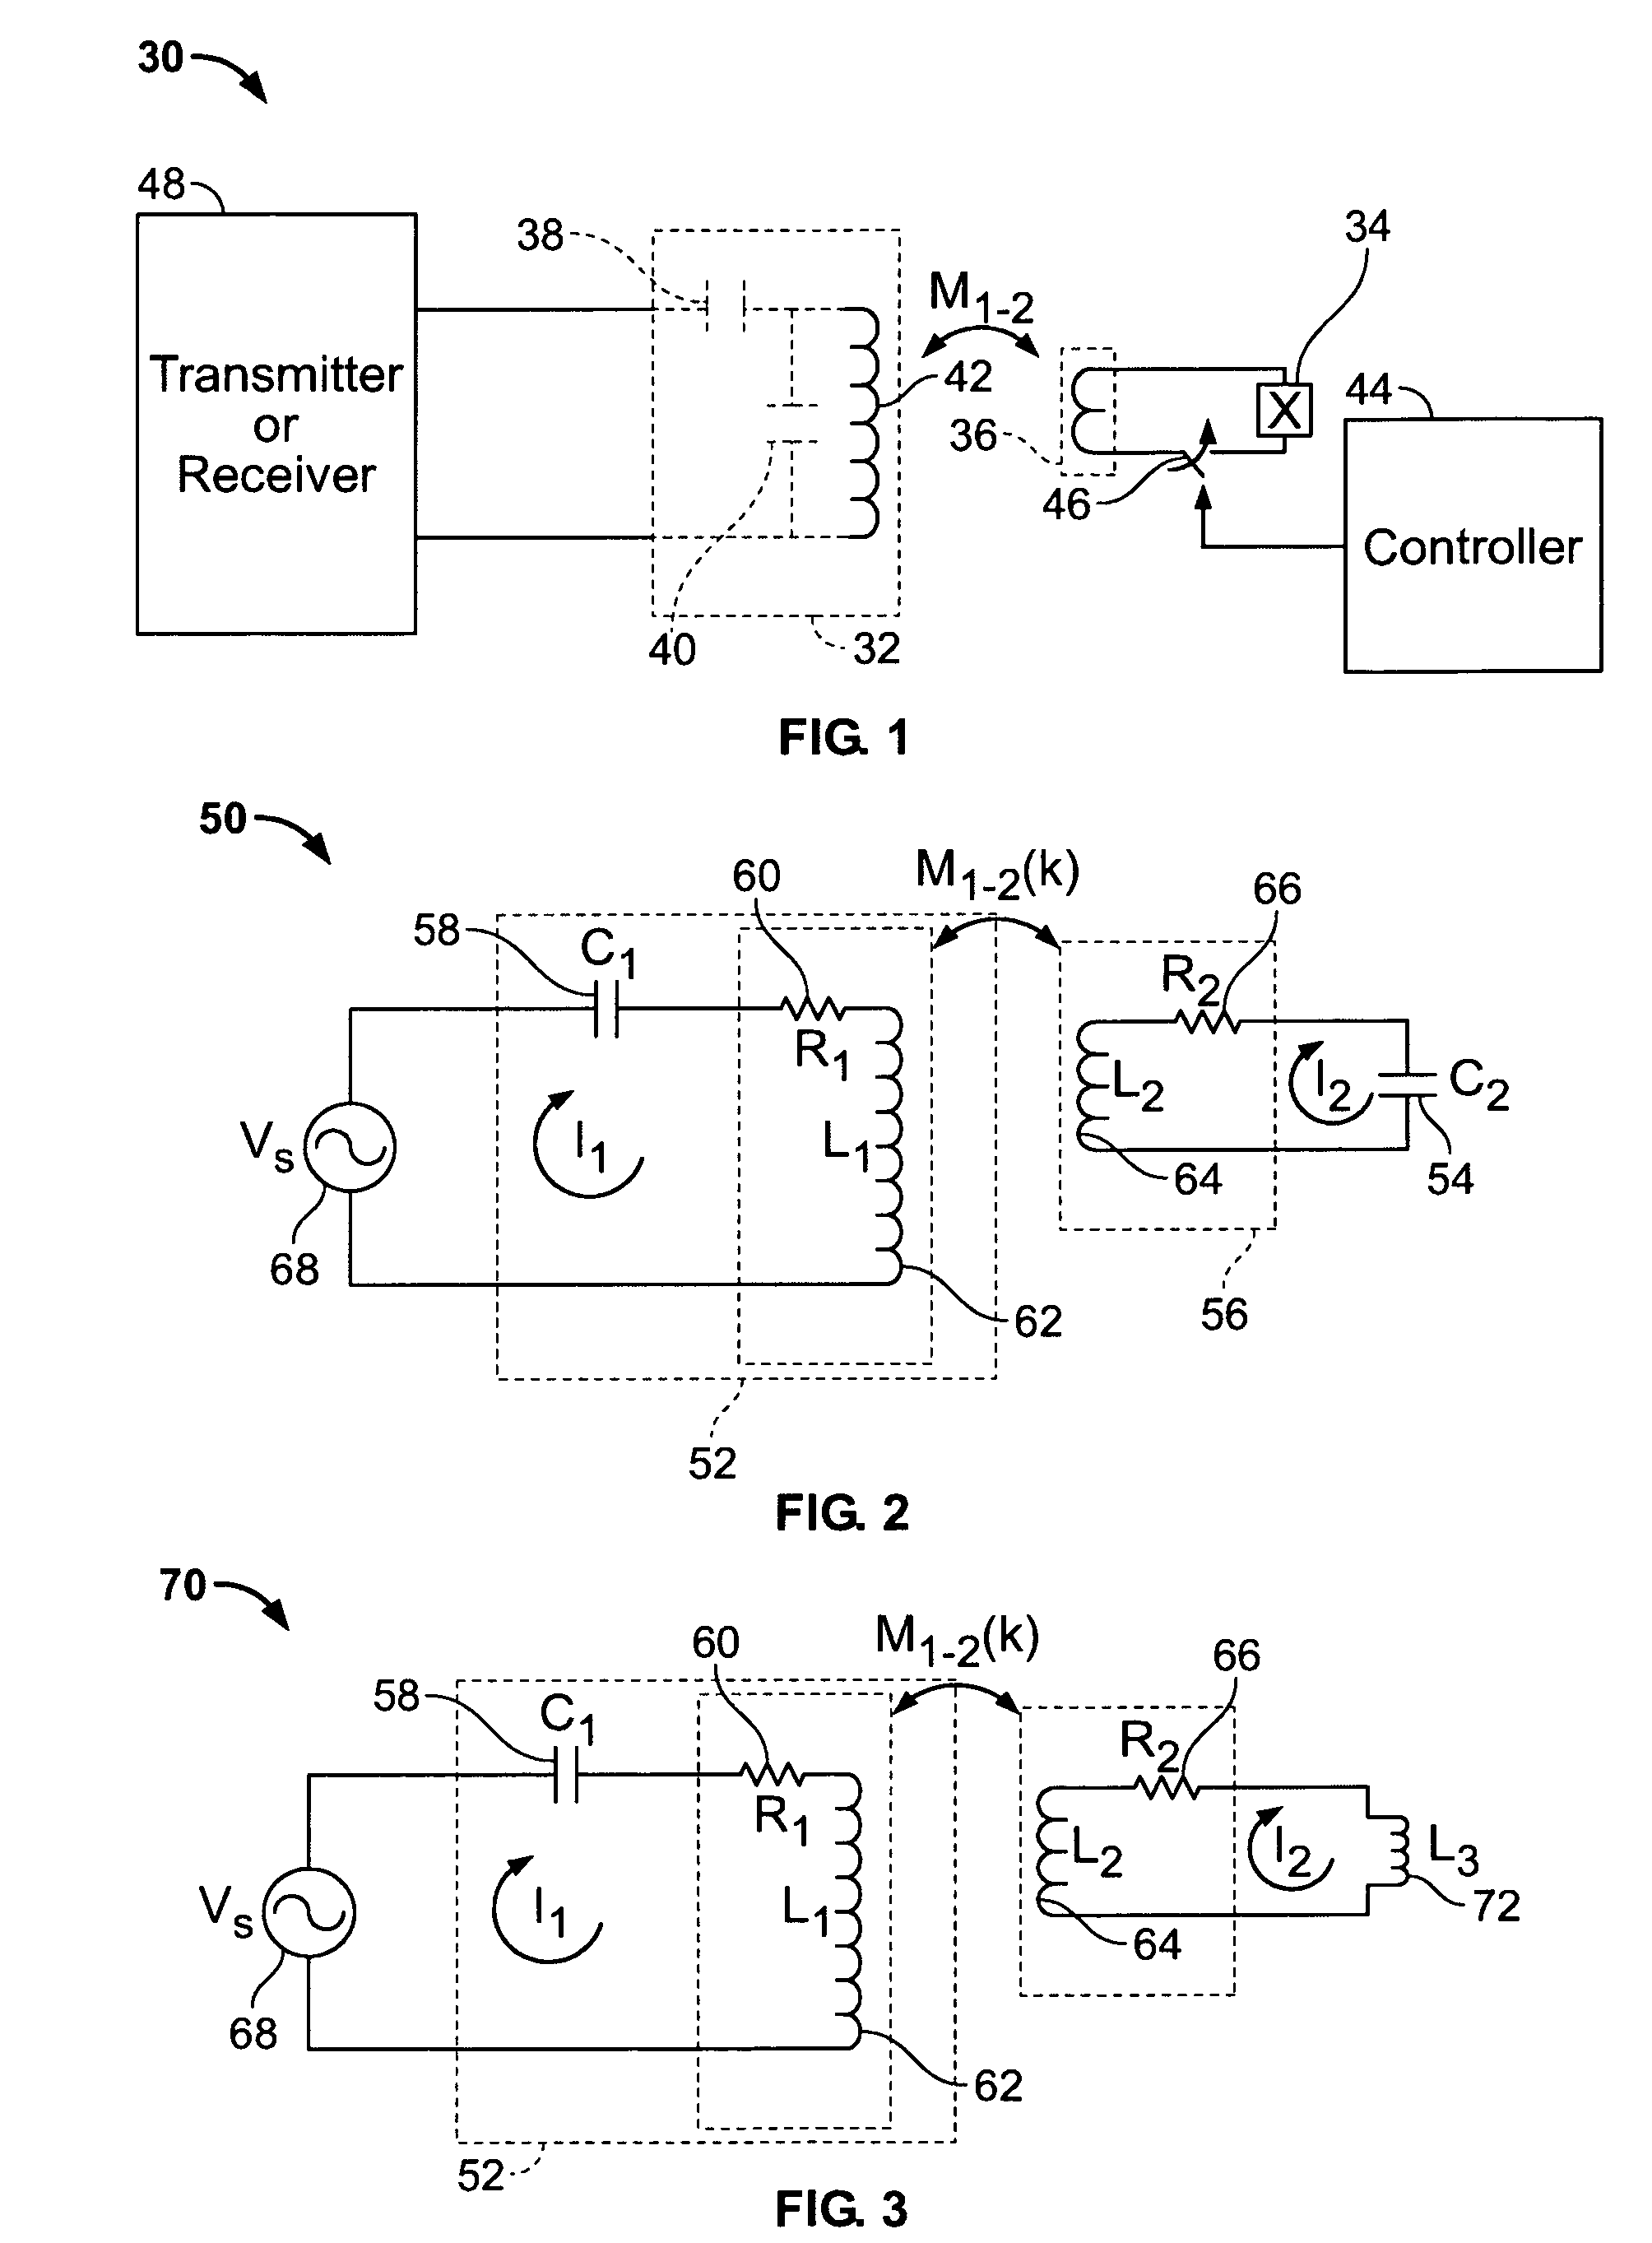 Resonant circuit tuning system using magnetic field coupled reactive elements